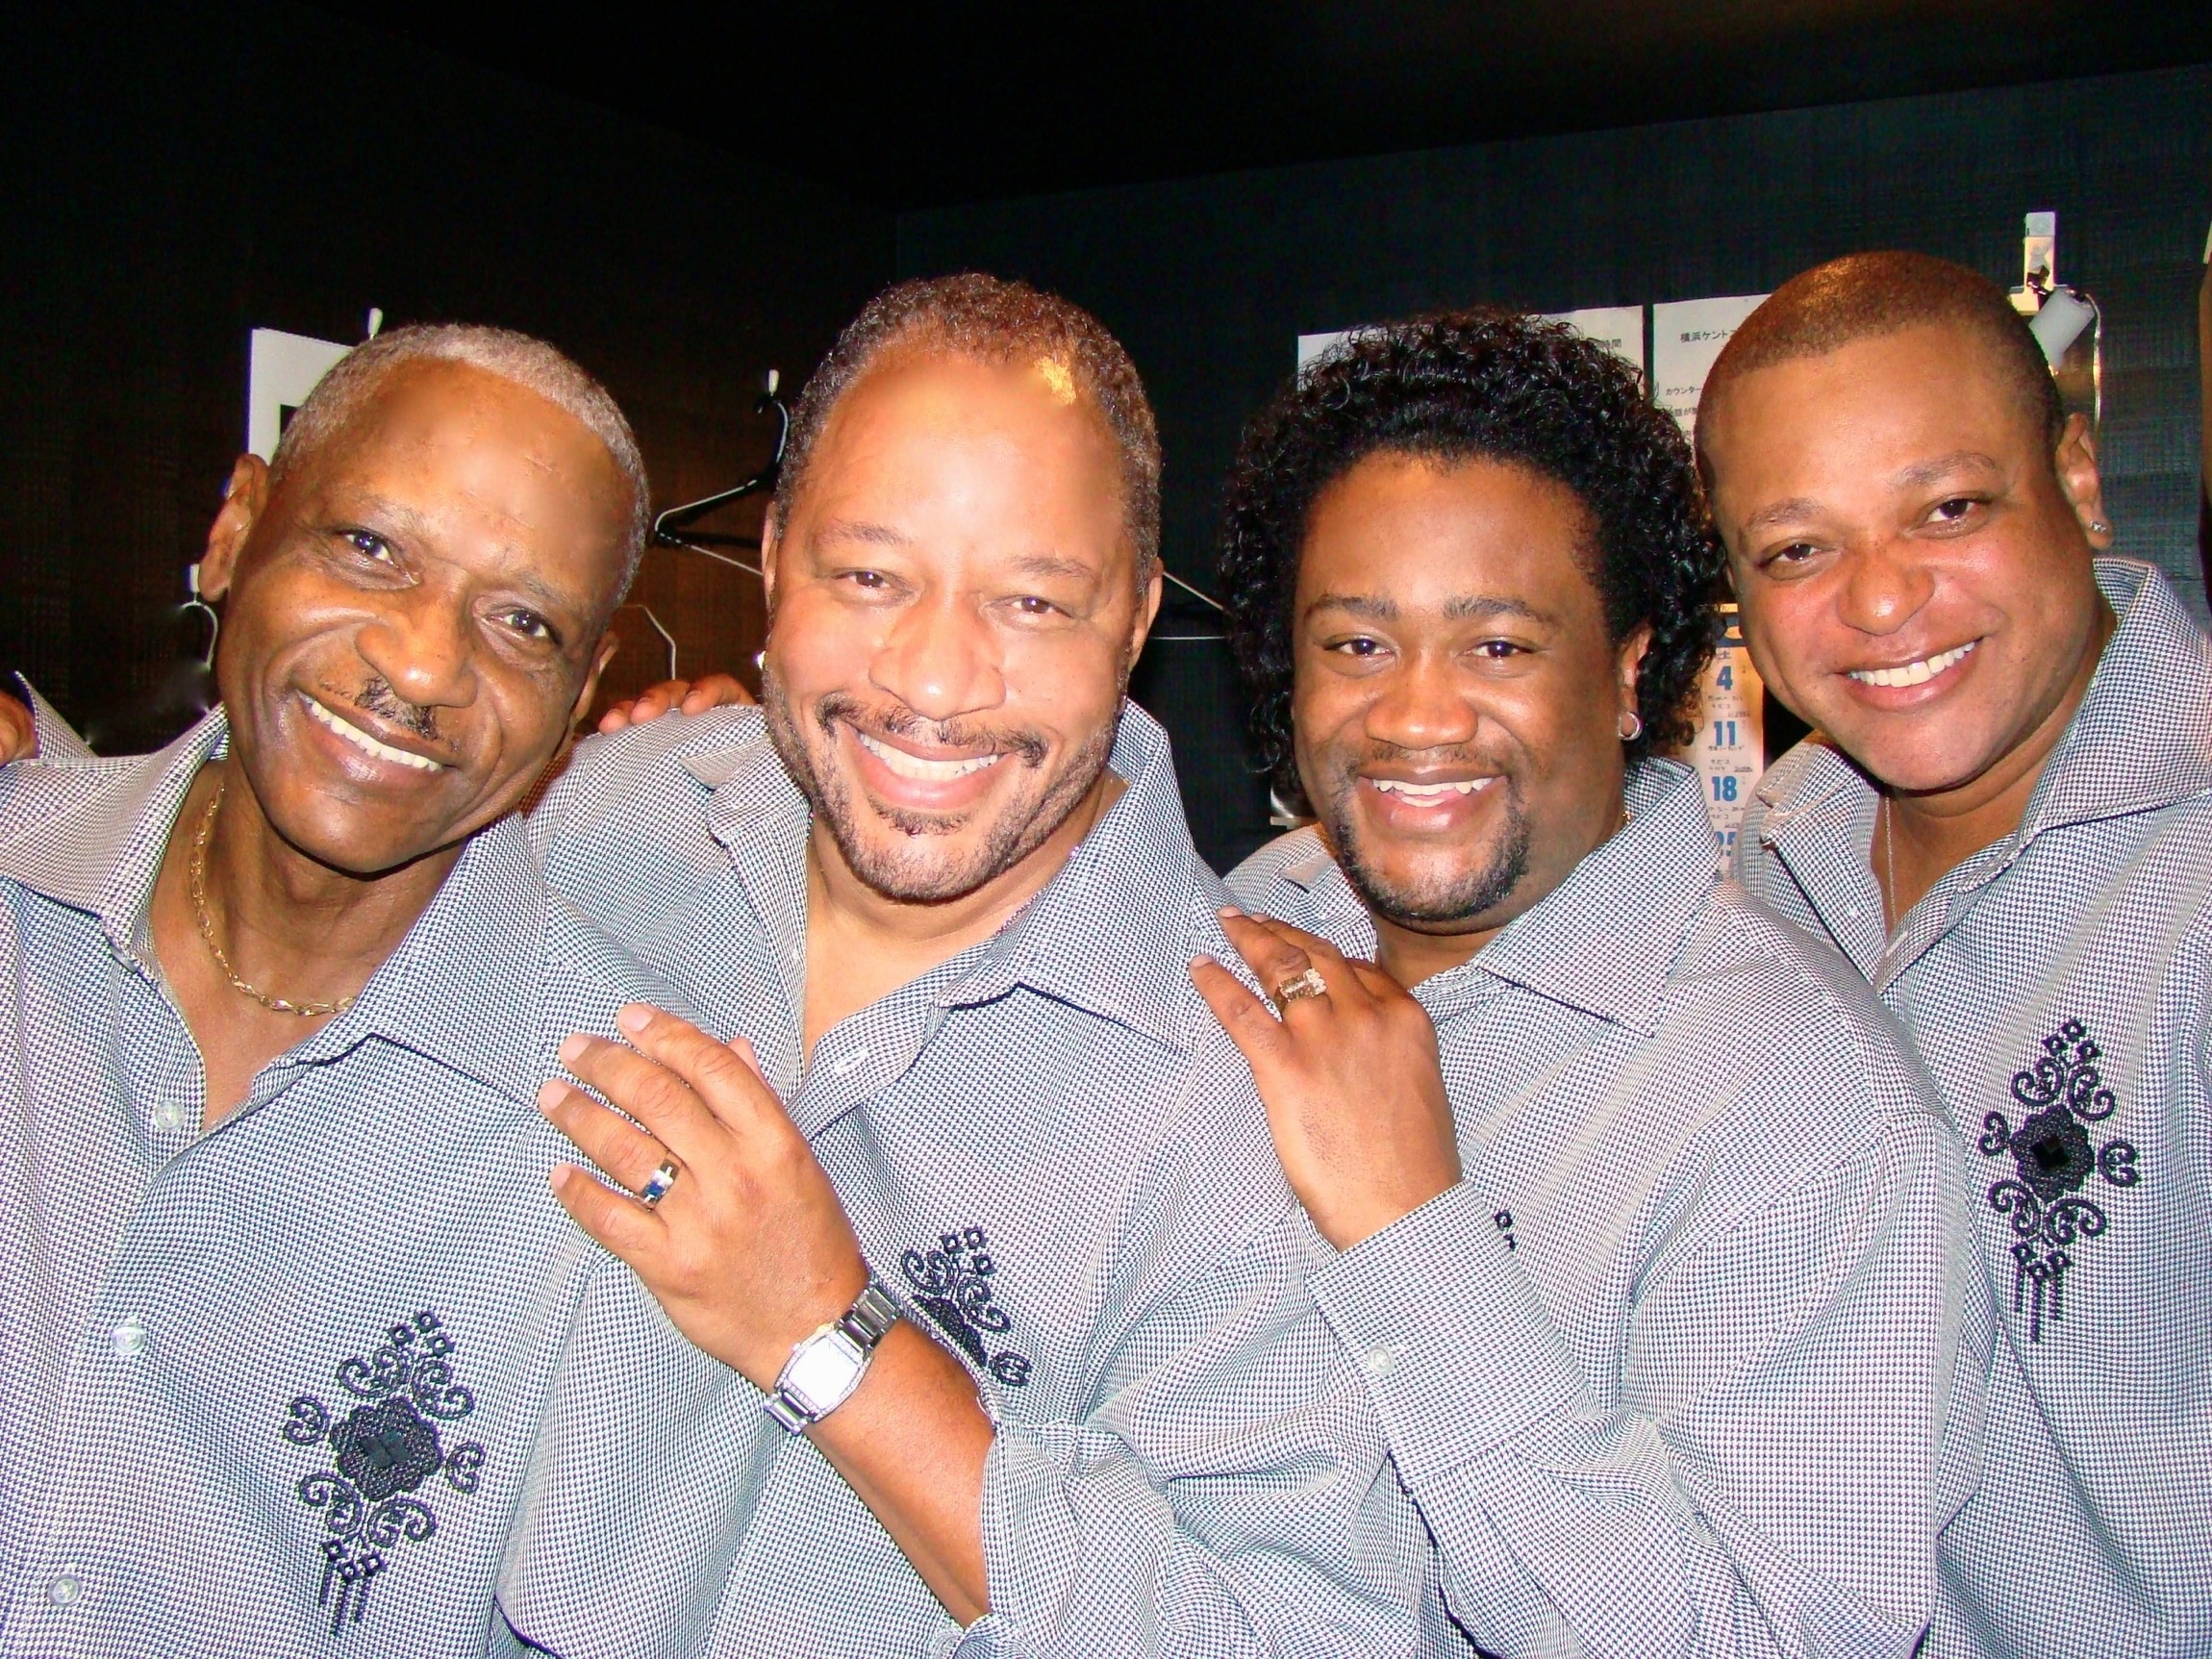 The Stylistics (Airrion Love, Jason Sharp, Herbert Murrell & Harold 'Eban' Brown) appear in The 70's Soul Jam Valentine's Concert at the Beacon Theatre, February 13, 2016 with shows at 3pm & 8pm.